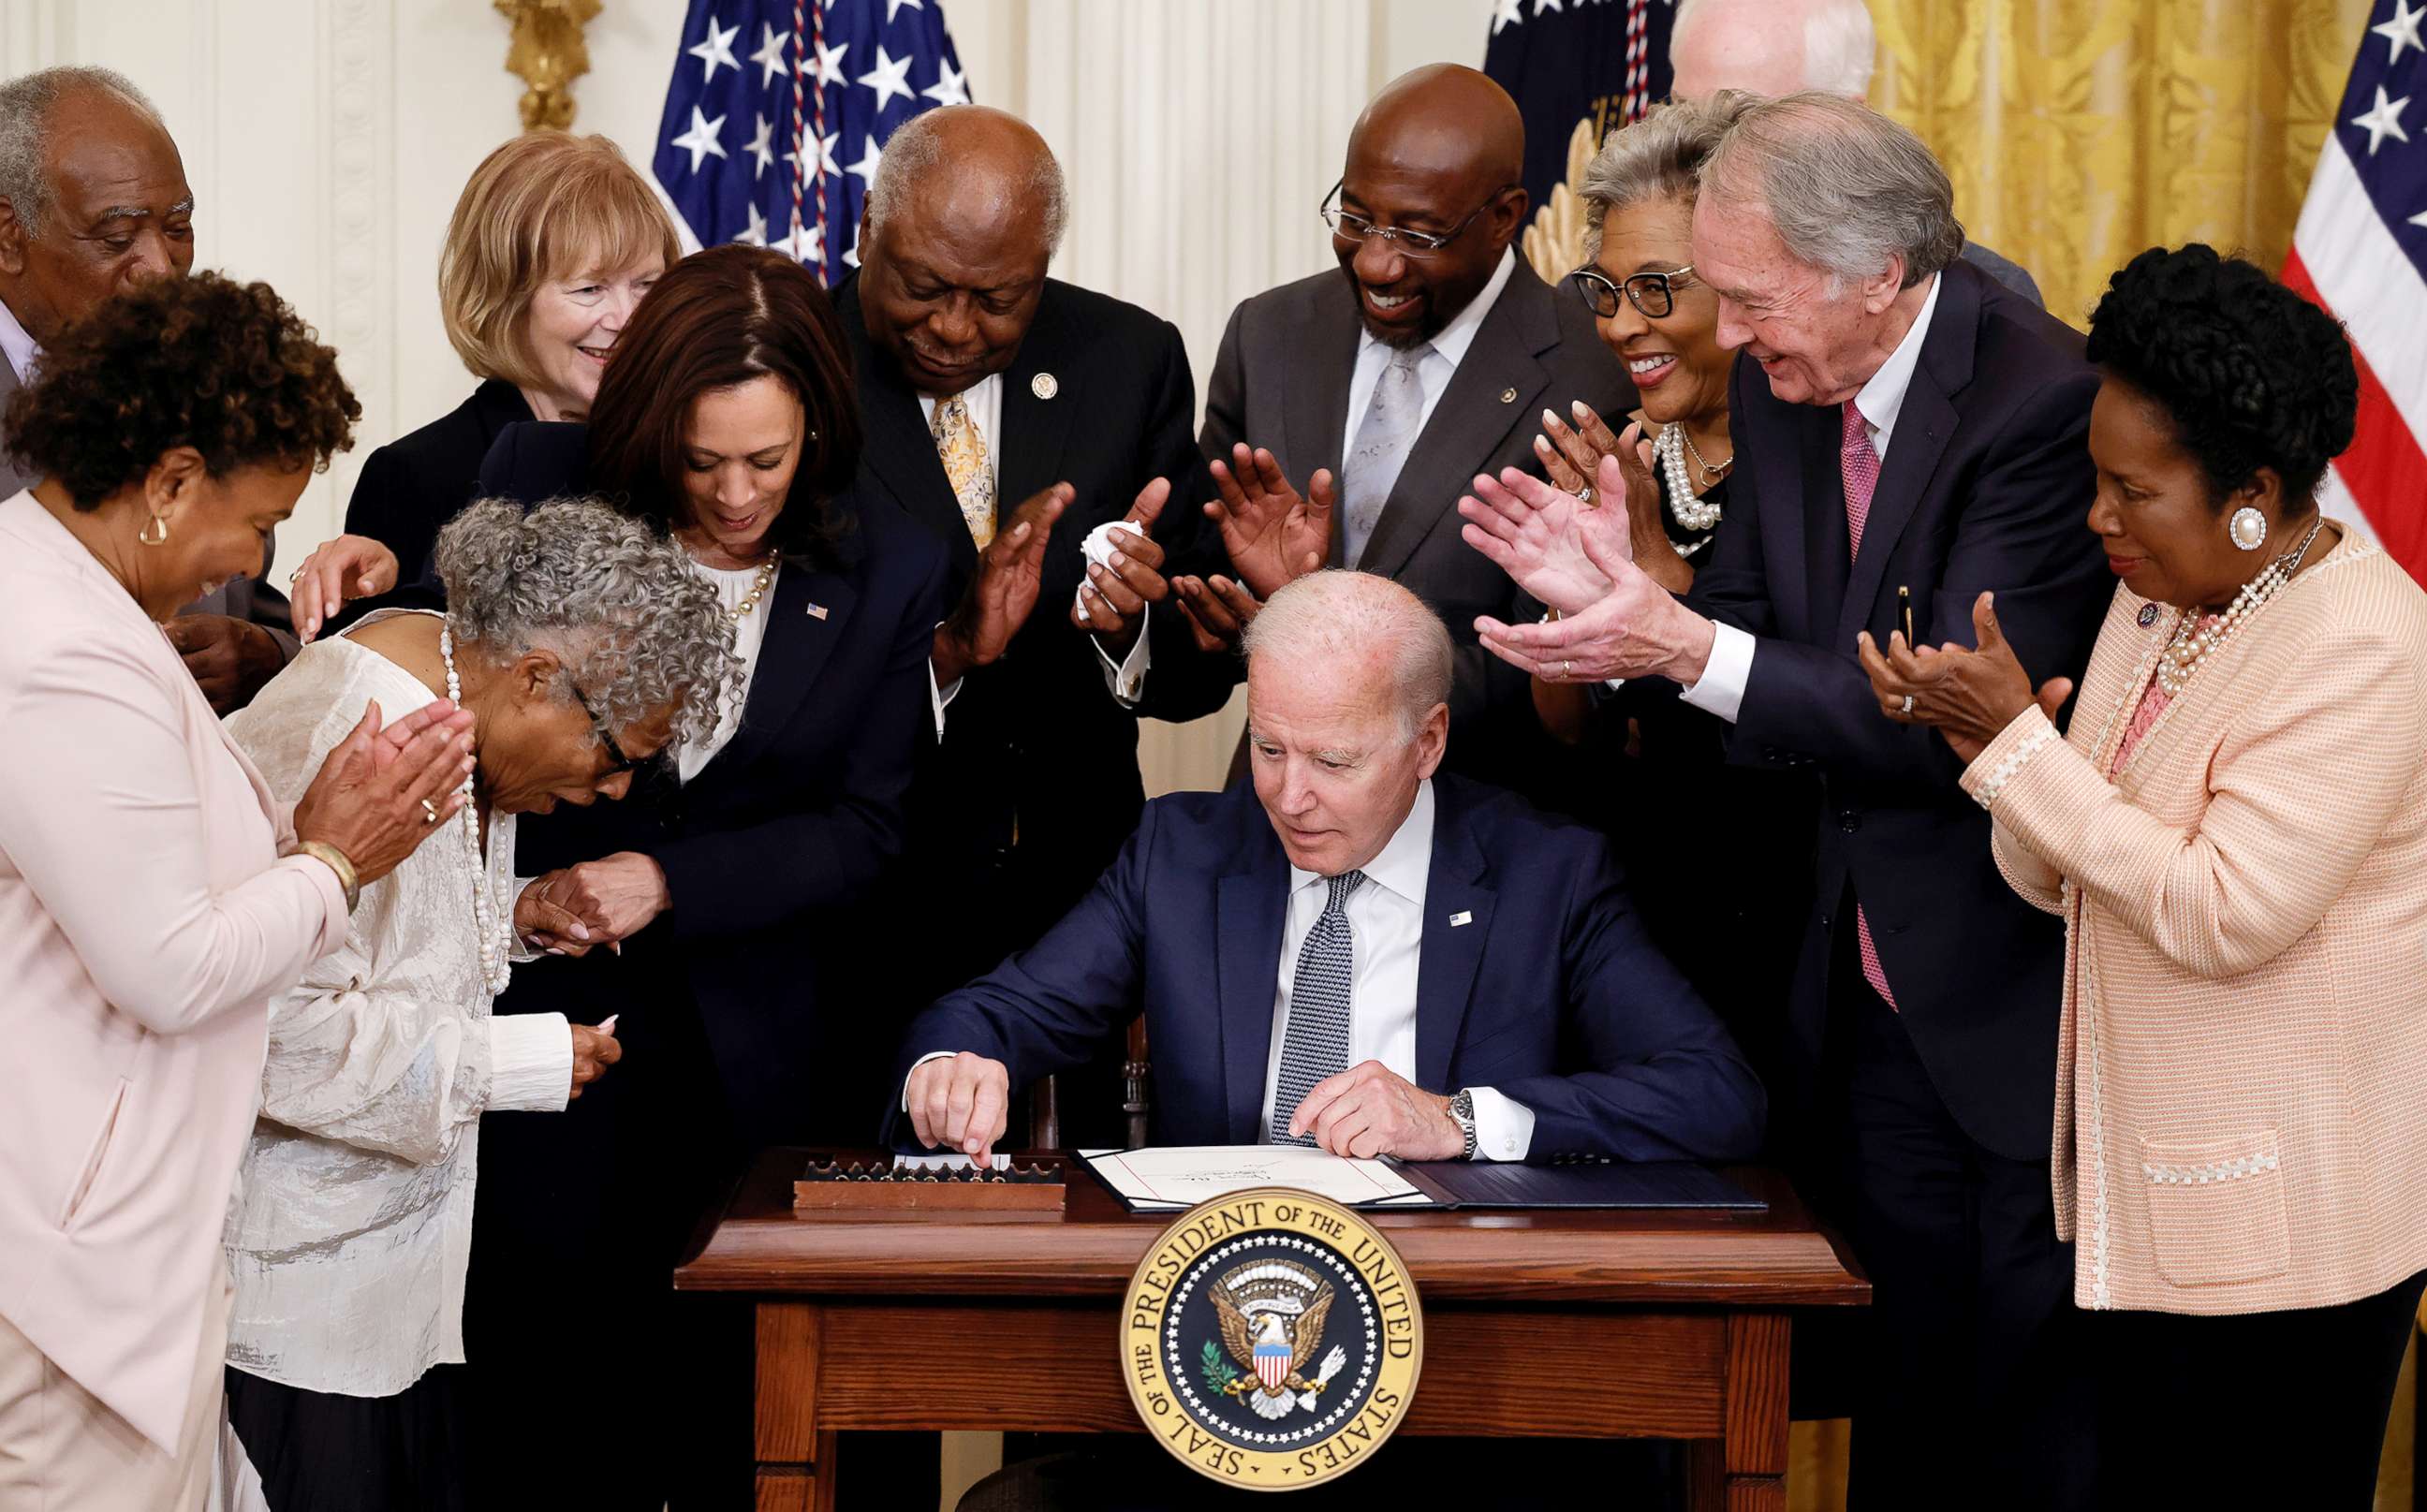 PHOTO: President Joe Biden is applauded as he reaches for a pen to sign the Juneteenth National Independence Day Act into law as Vice President Kamala Harris stands by in the East Room of the White House June 17, 2021. 